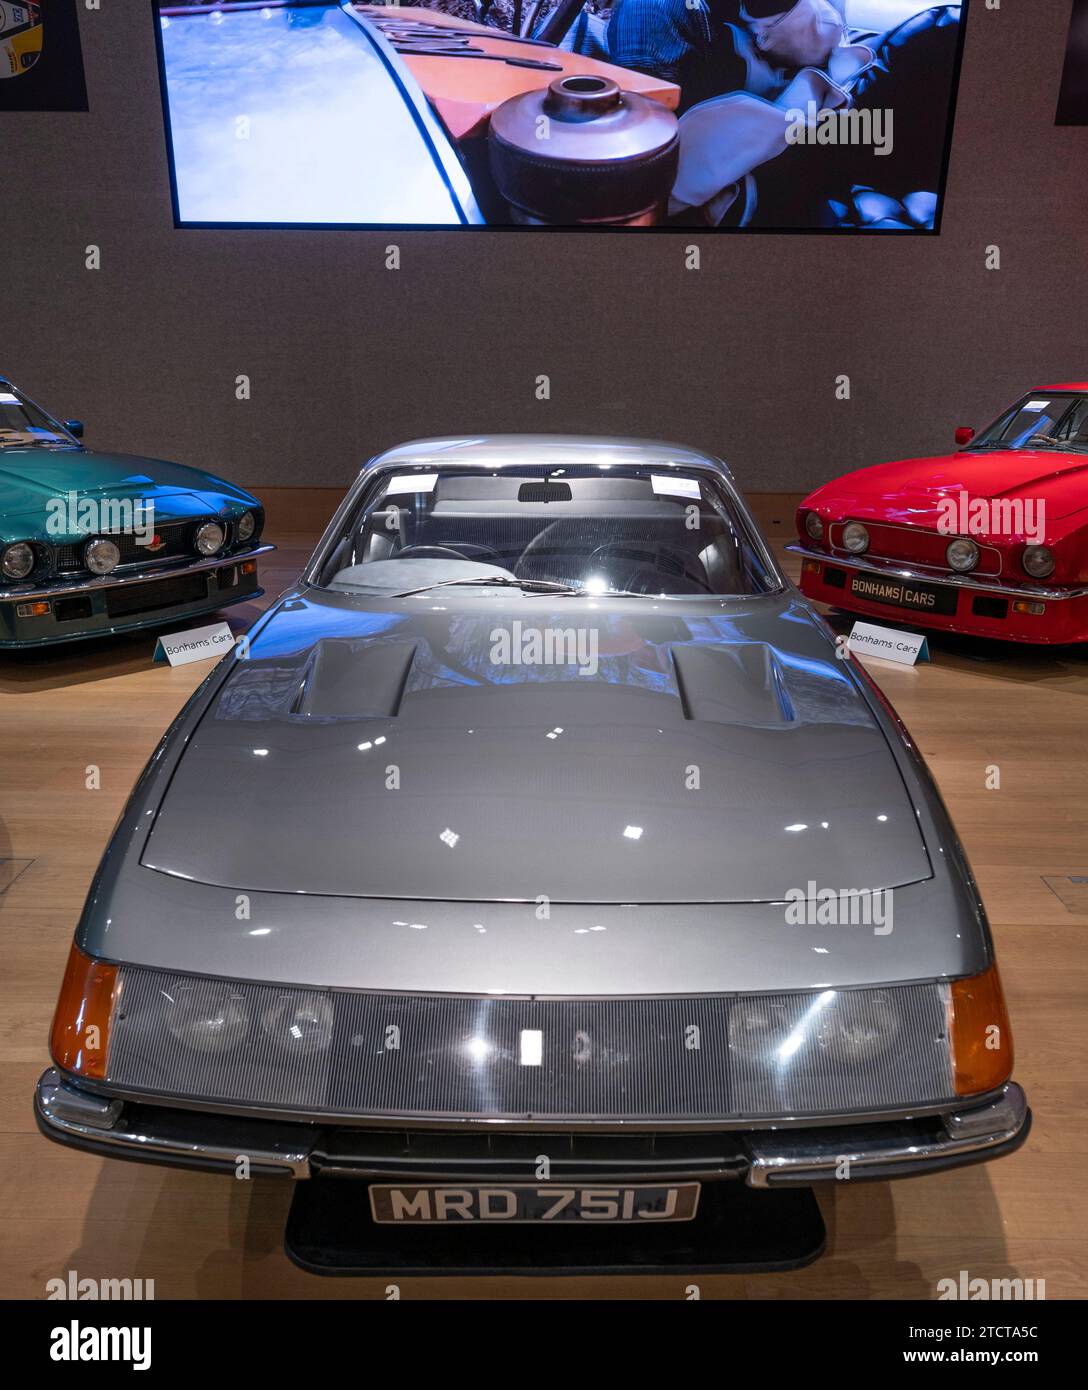 London, UK. 14th Dec, 2023. The Bond Street Sale, Important Collectors' Motor Cars takes place on 15 December 2023 at Bonhams. Auction highlights include: Formerly owned by Lord Hesketh and Eric Clapton, a 1970 Ferrari 365 GTB/4 'Daytona' Berlinetta. Estimate: £450,000-550,000. Credit: Malcolm Park/Alamy Live News Stock Photo